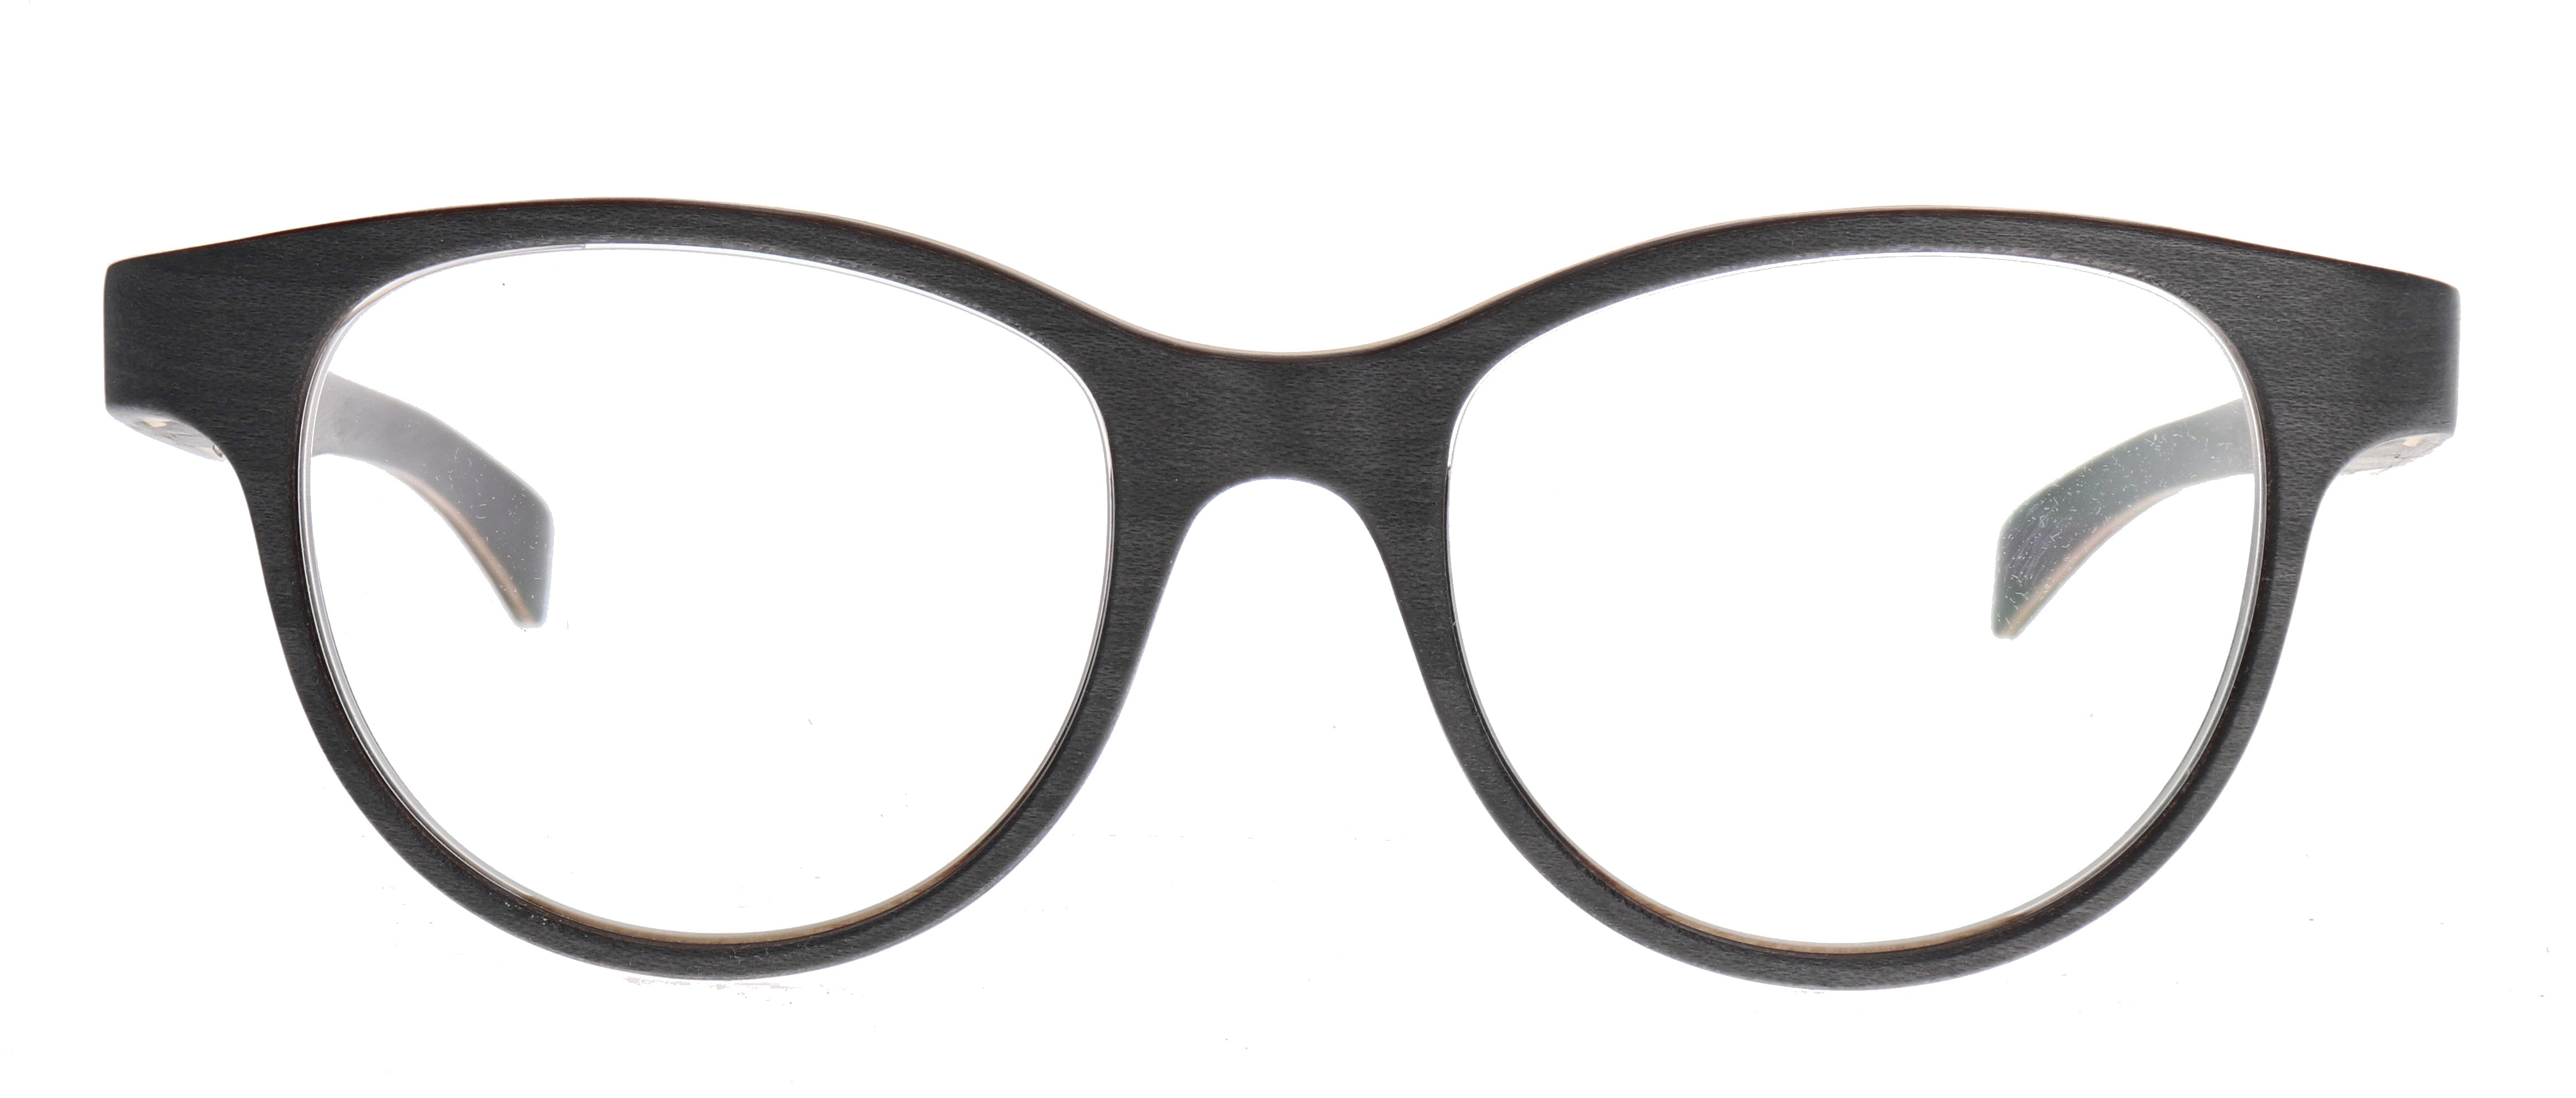 Rolf Spectacles Velox